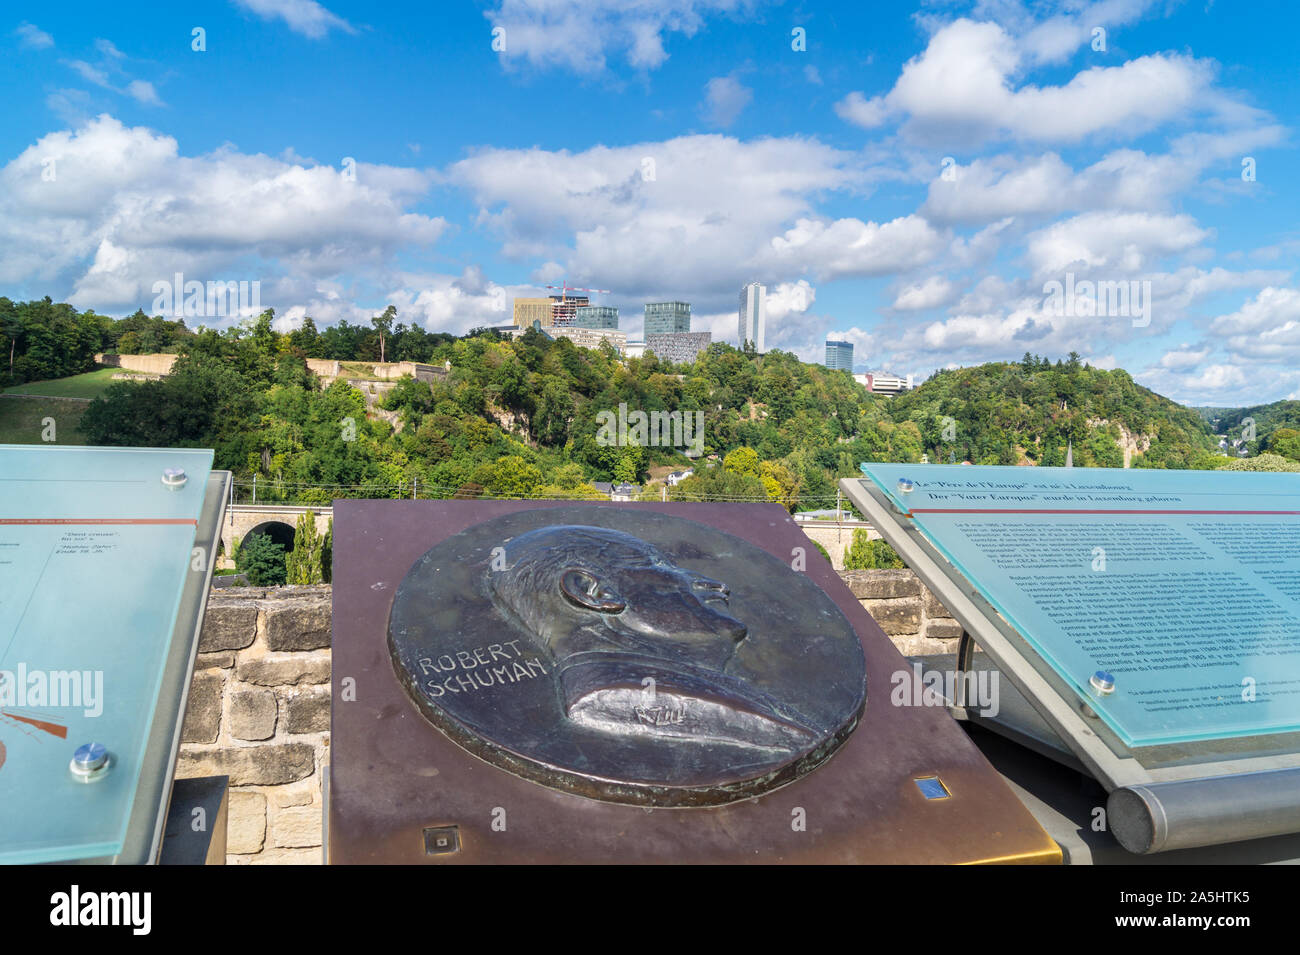 European Union institutions, Kirchberg, seen from memorial to Robert Schuman on the casemates du Bock, Luxembourg city, Grand Duchy of Luxembourg Stock Photo